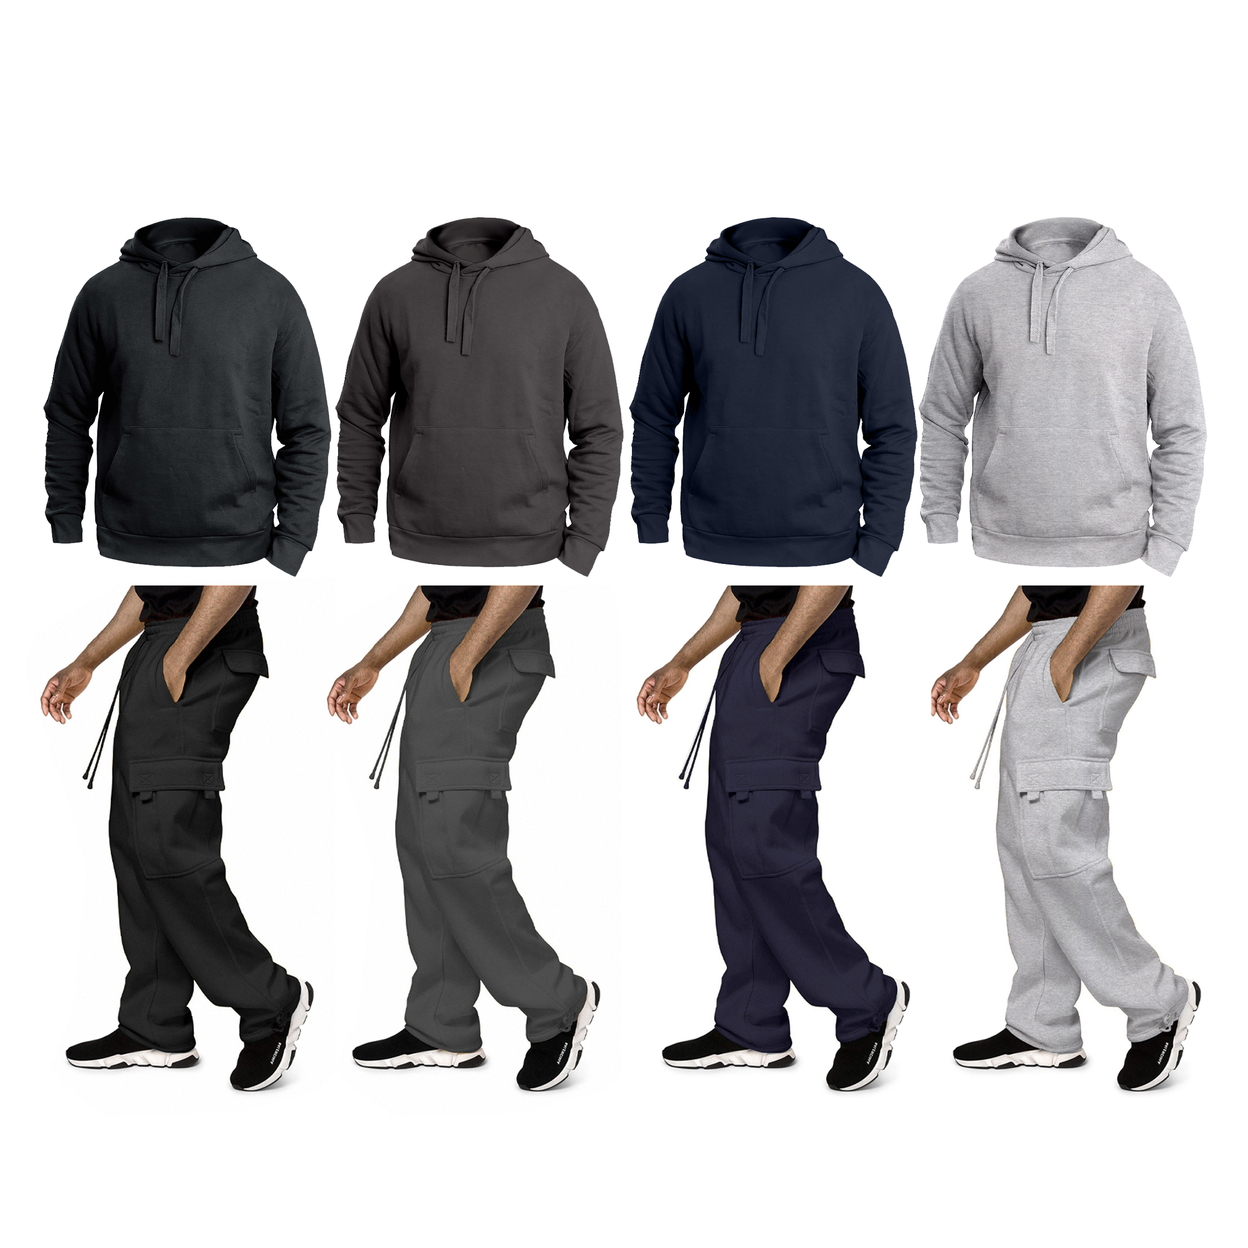 Multi-Pack: Big & Tall Men's Winter Warm Cozy Athletic Fleece Lined Multi-Pocket Cargo Sweatsuit - Charcoal, 1-pack, Xx-large